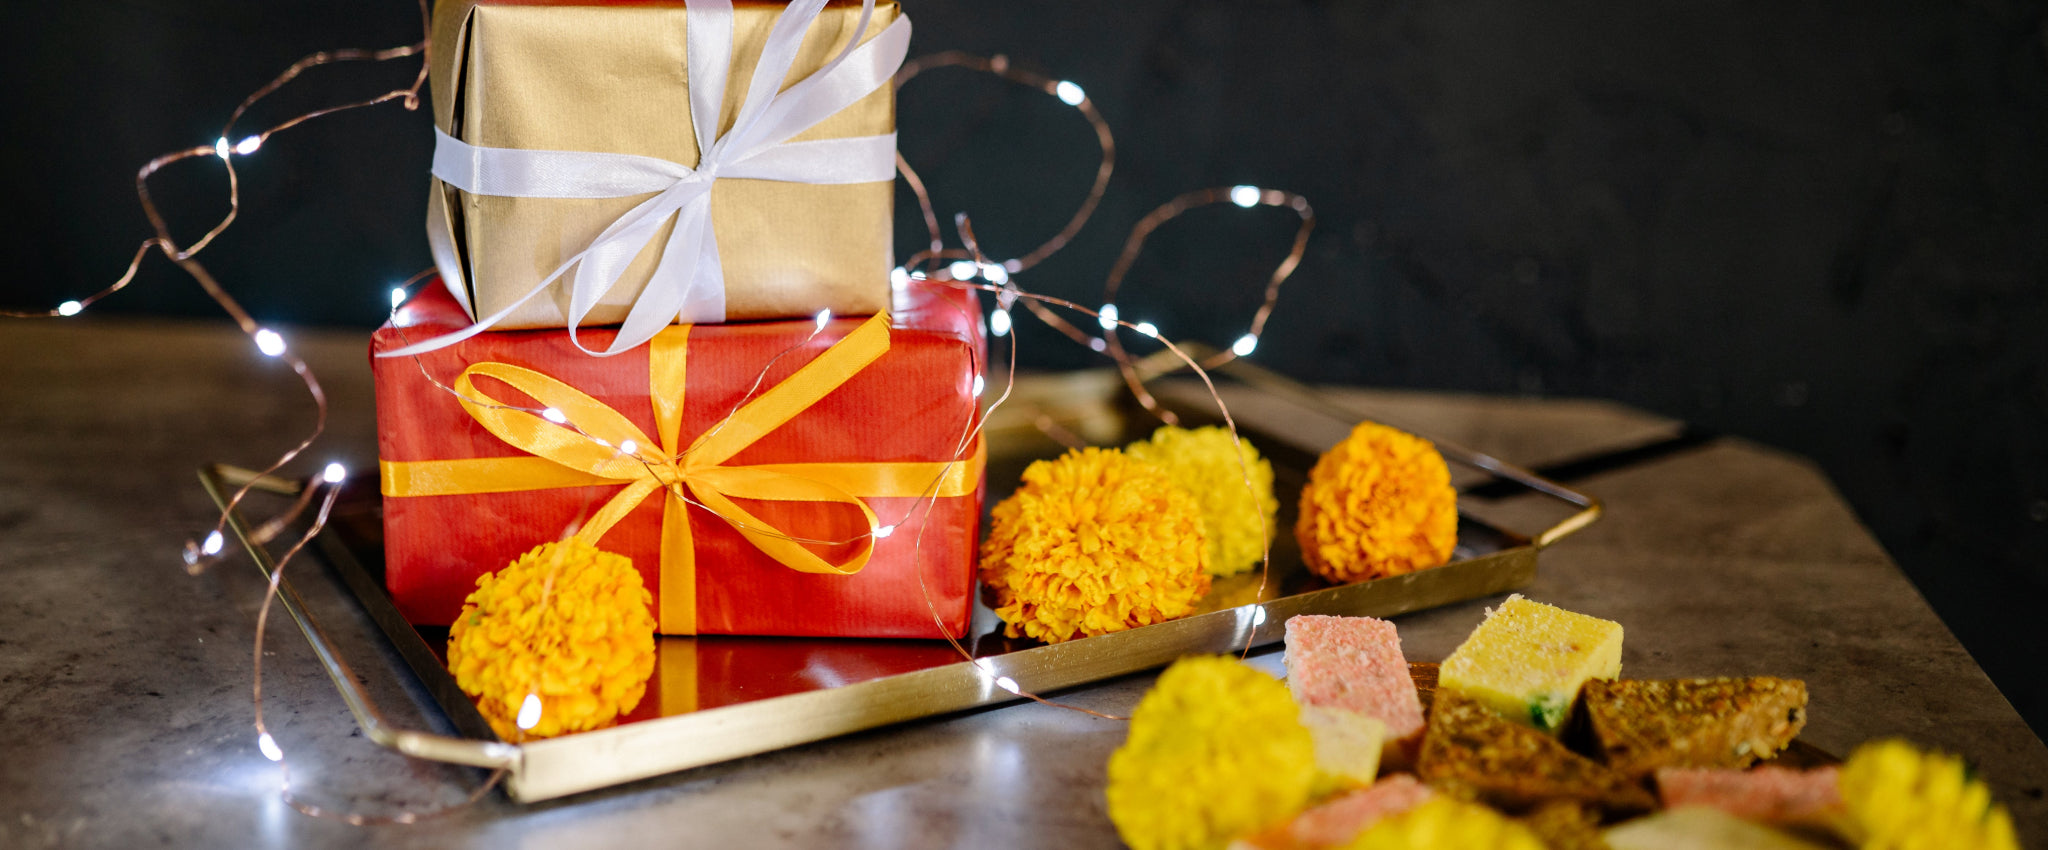 Can you suggest a budget-friendly Diwali gift idea for employees? - Quora